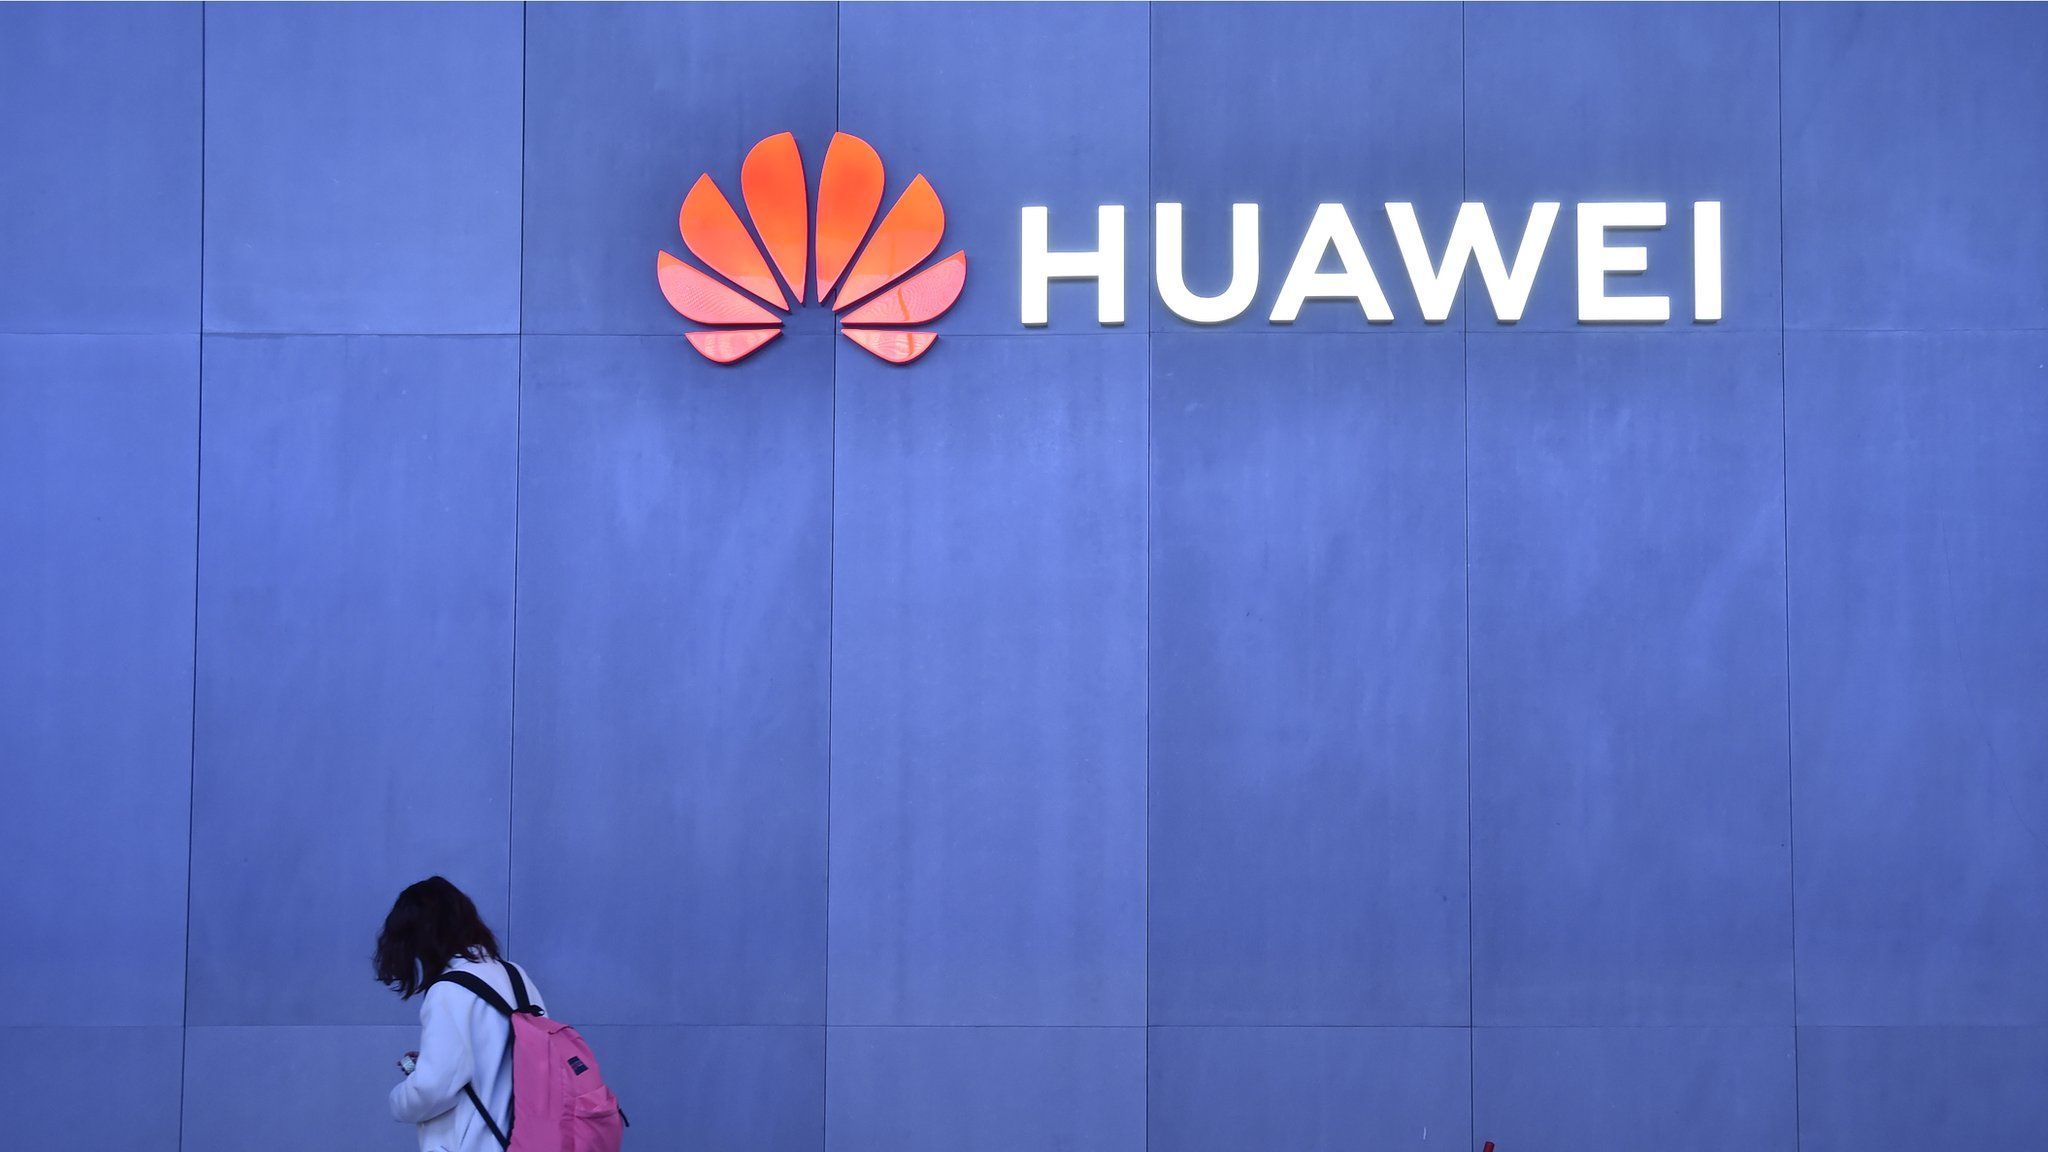 An attendee walk by the Huawei booth at CES 2019 at the Las Vegas Convention Center on January 8, 2019 in Las Vegas, Nevada